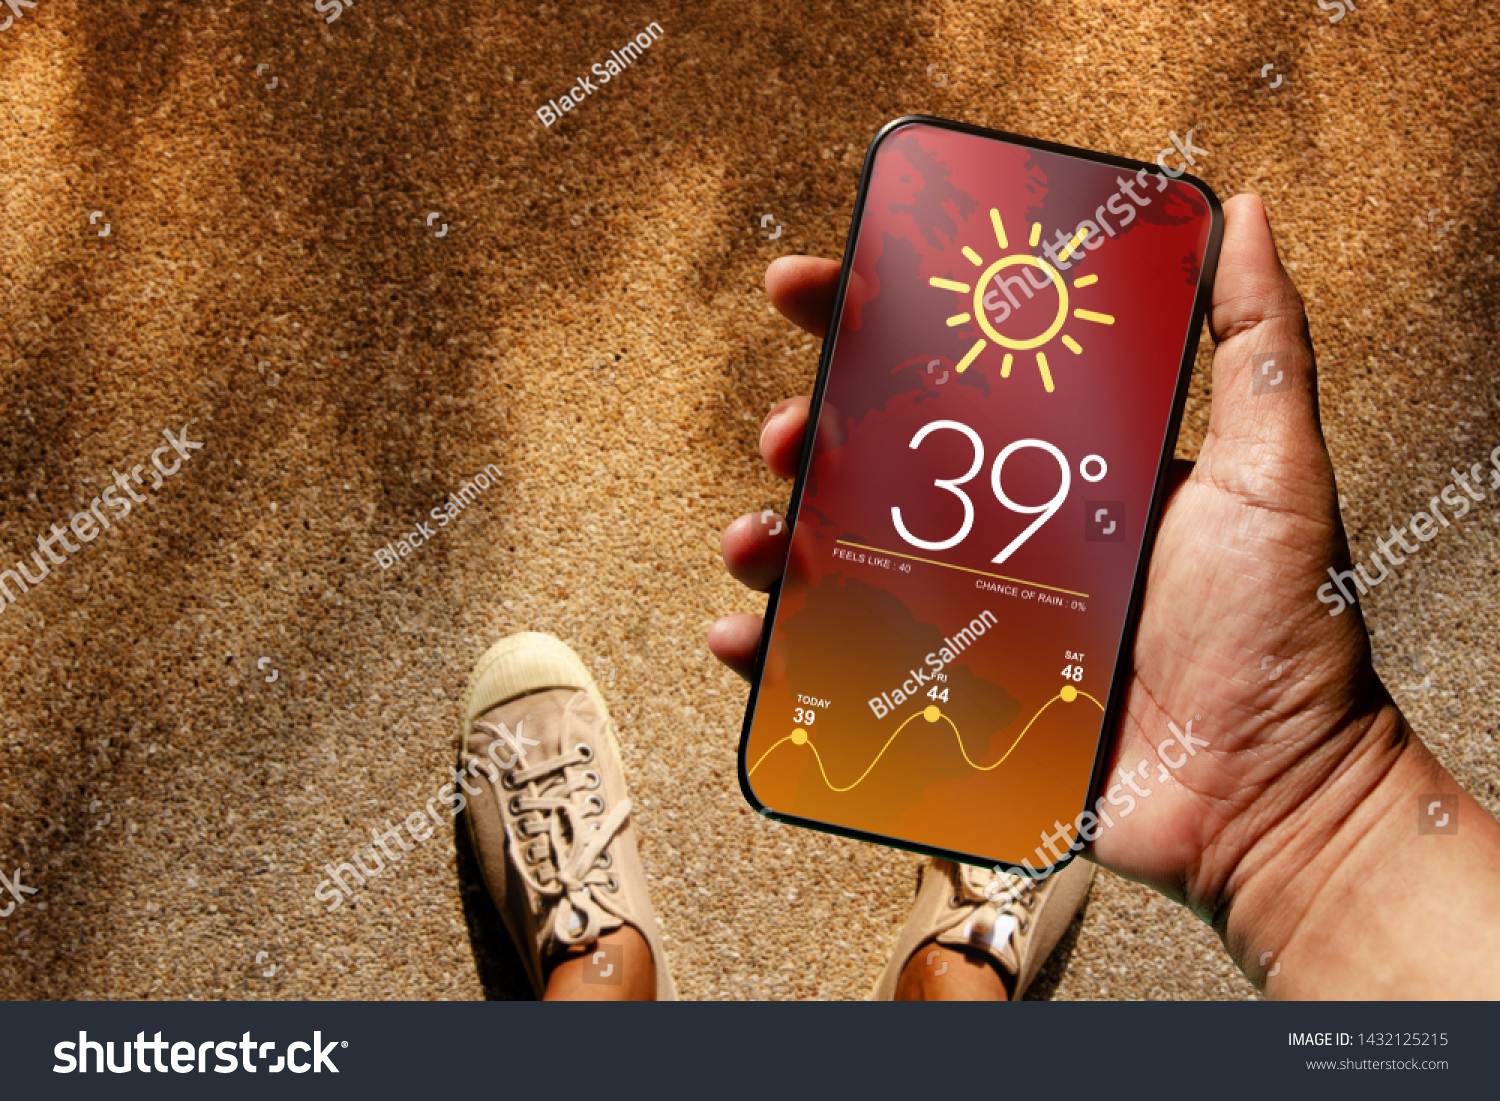 Ecology and Technology Concept. High Temperature Weather show on Mobile Screen on Hot Sunny Day. Top View, Grunge Dirty Concrete Floor with Sunlight as background #1432125215